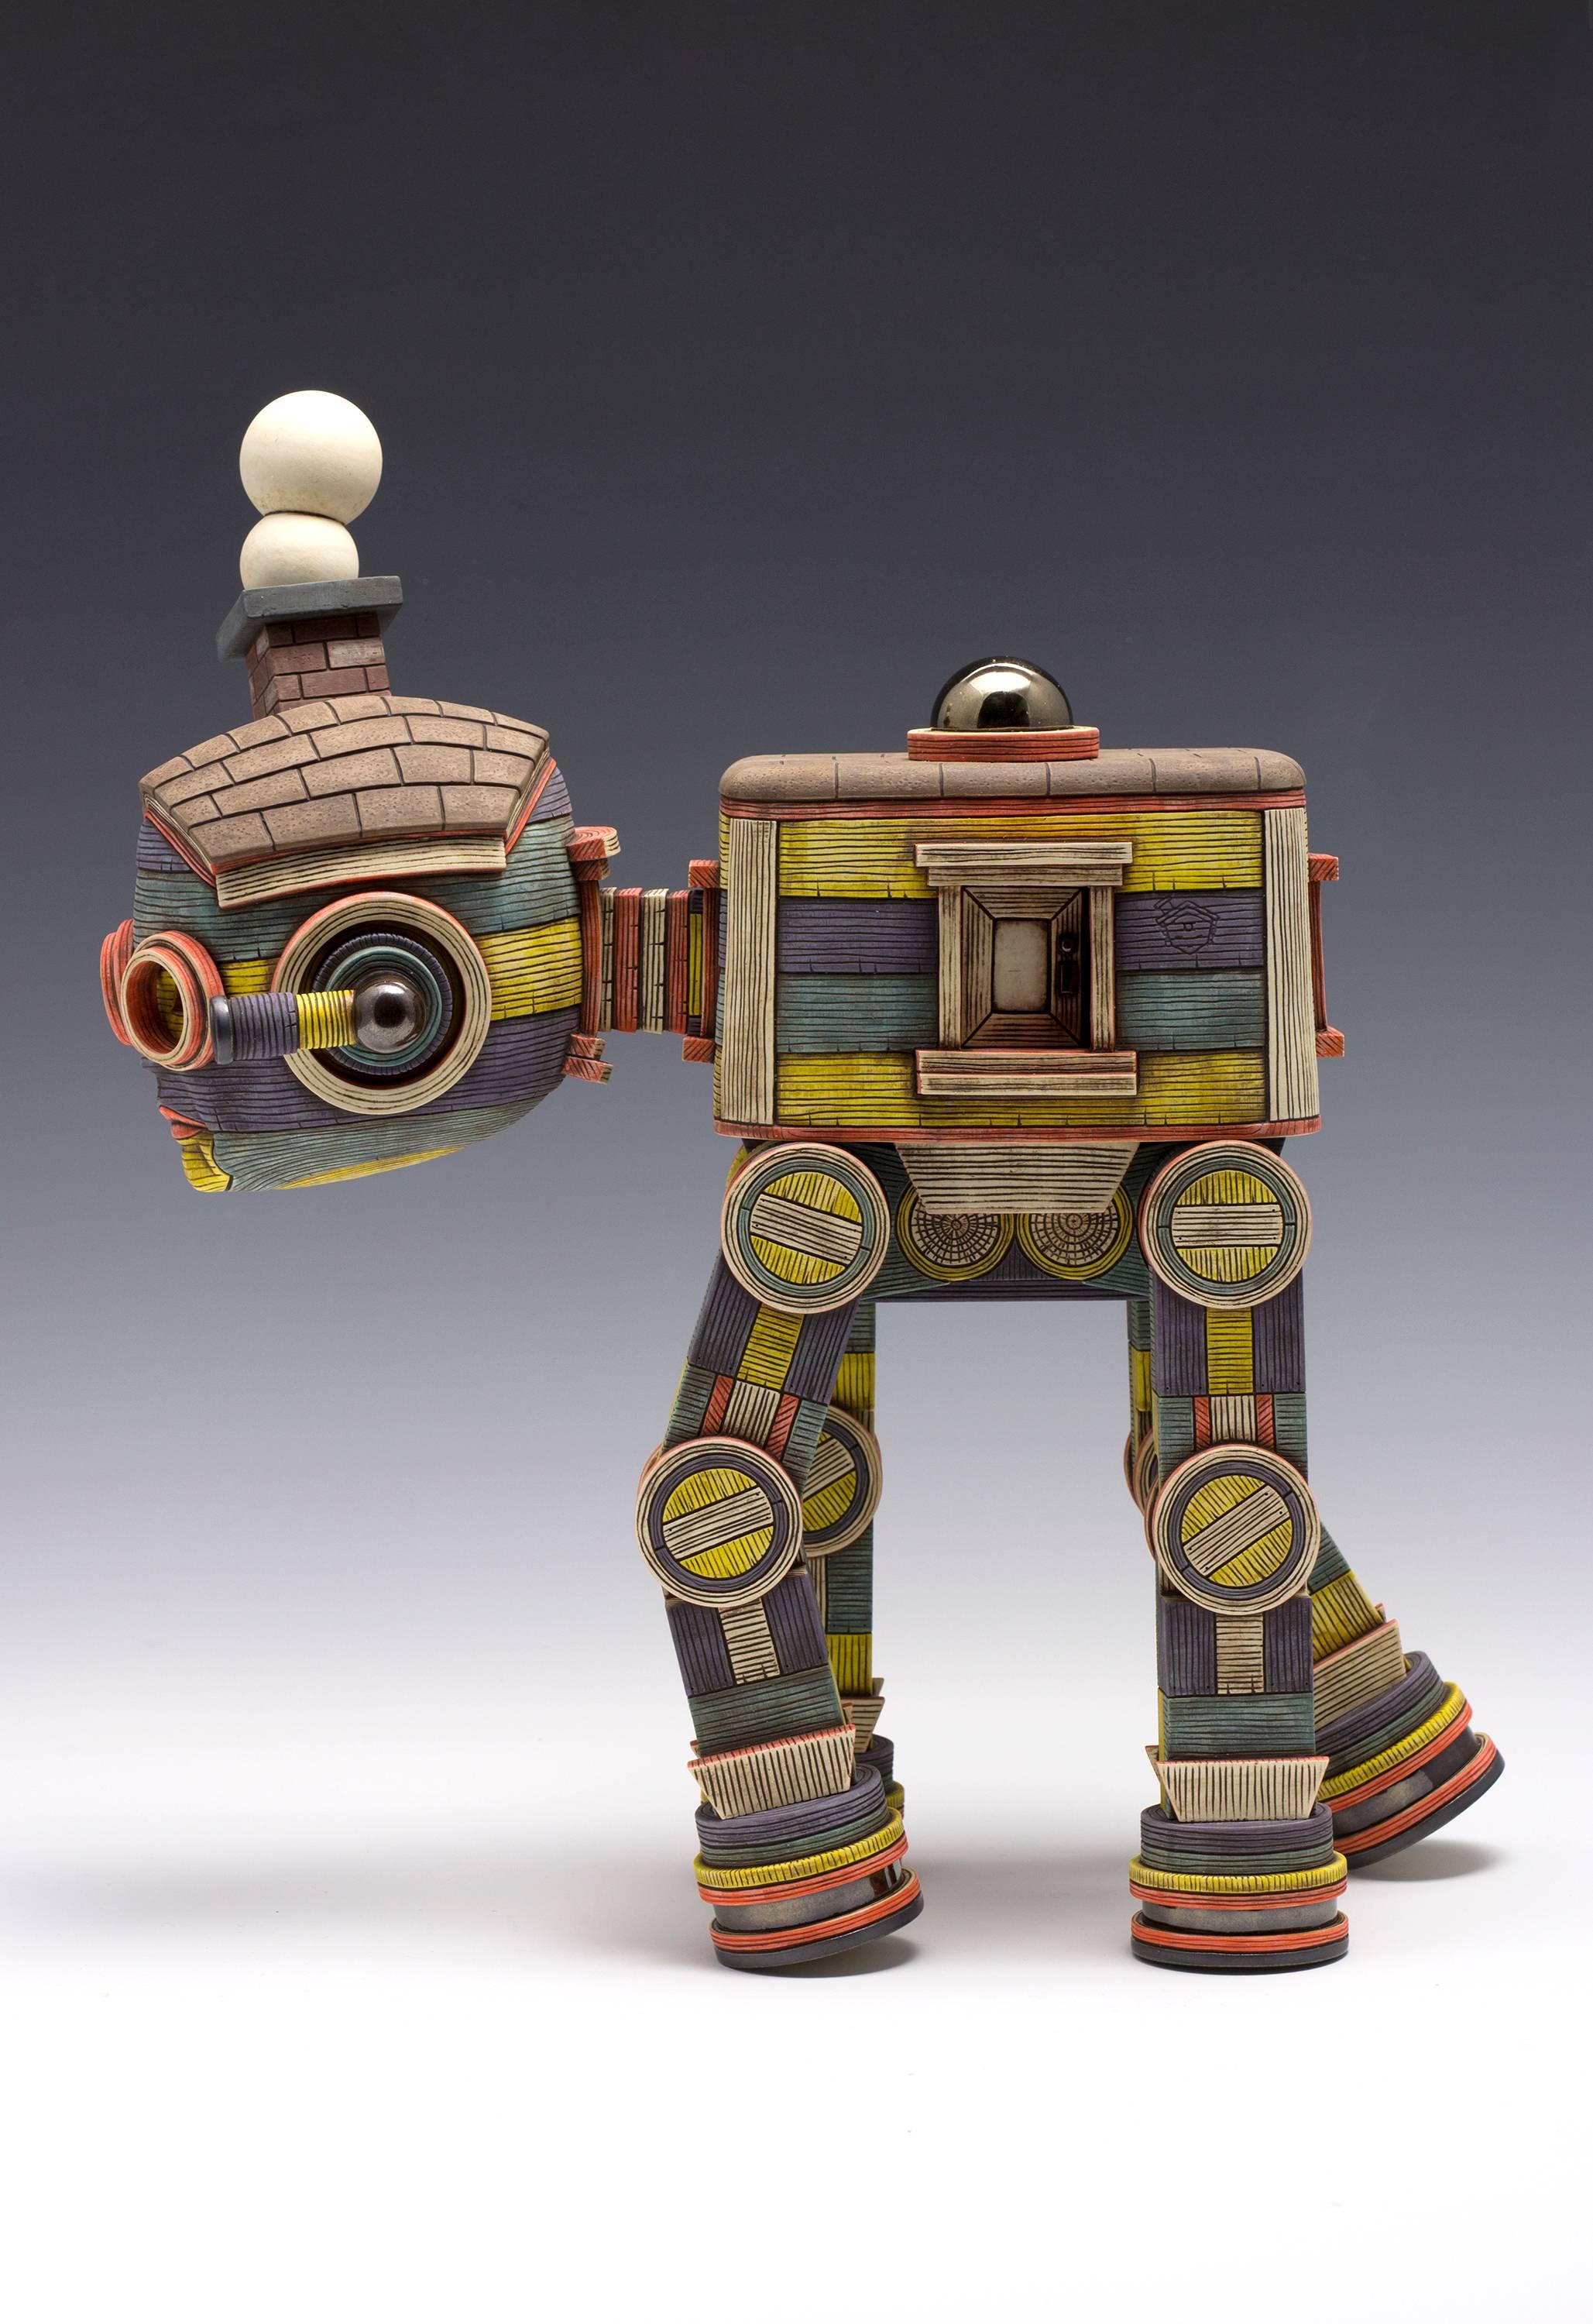 Calvin Ma is a ceramic sculptor born and raised in San Francisco, California. He received his BA in Industrial Arts from San Francisco State University and MFA in sculpture from the Academy of Art University. His work has been exhibited in numerous